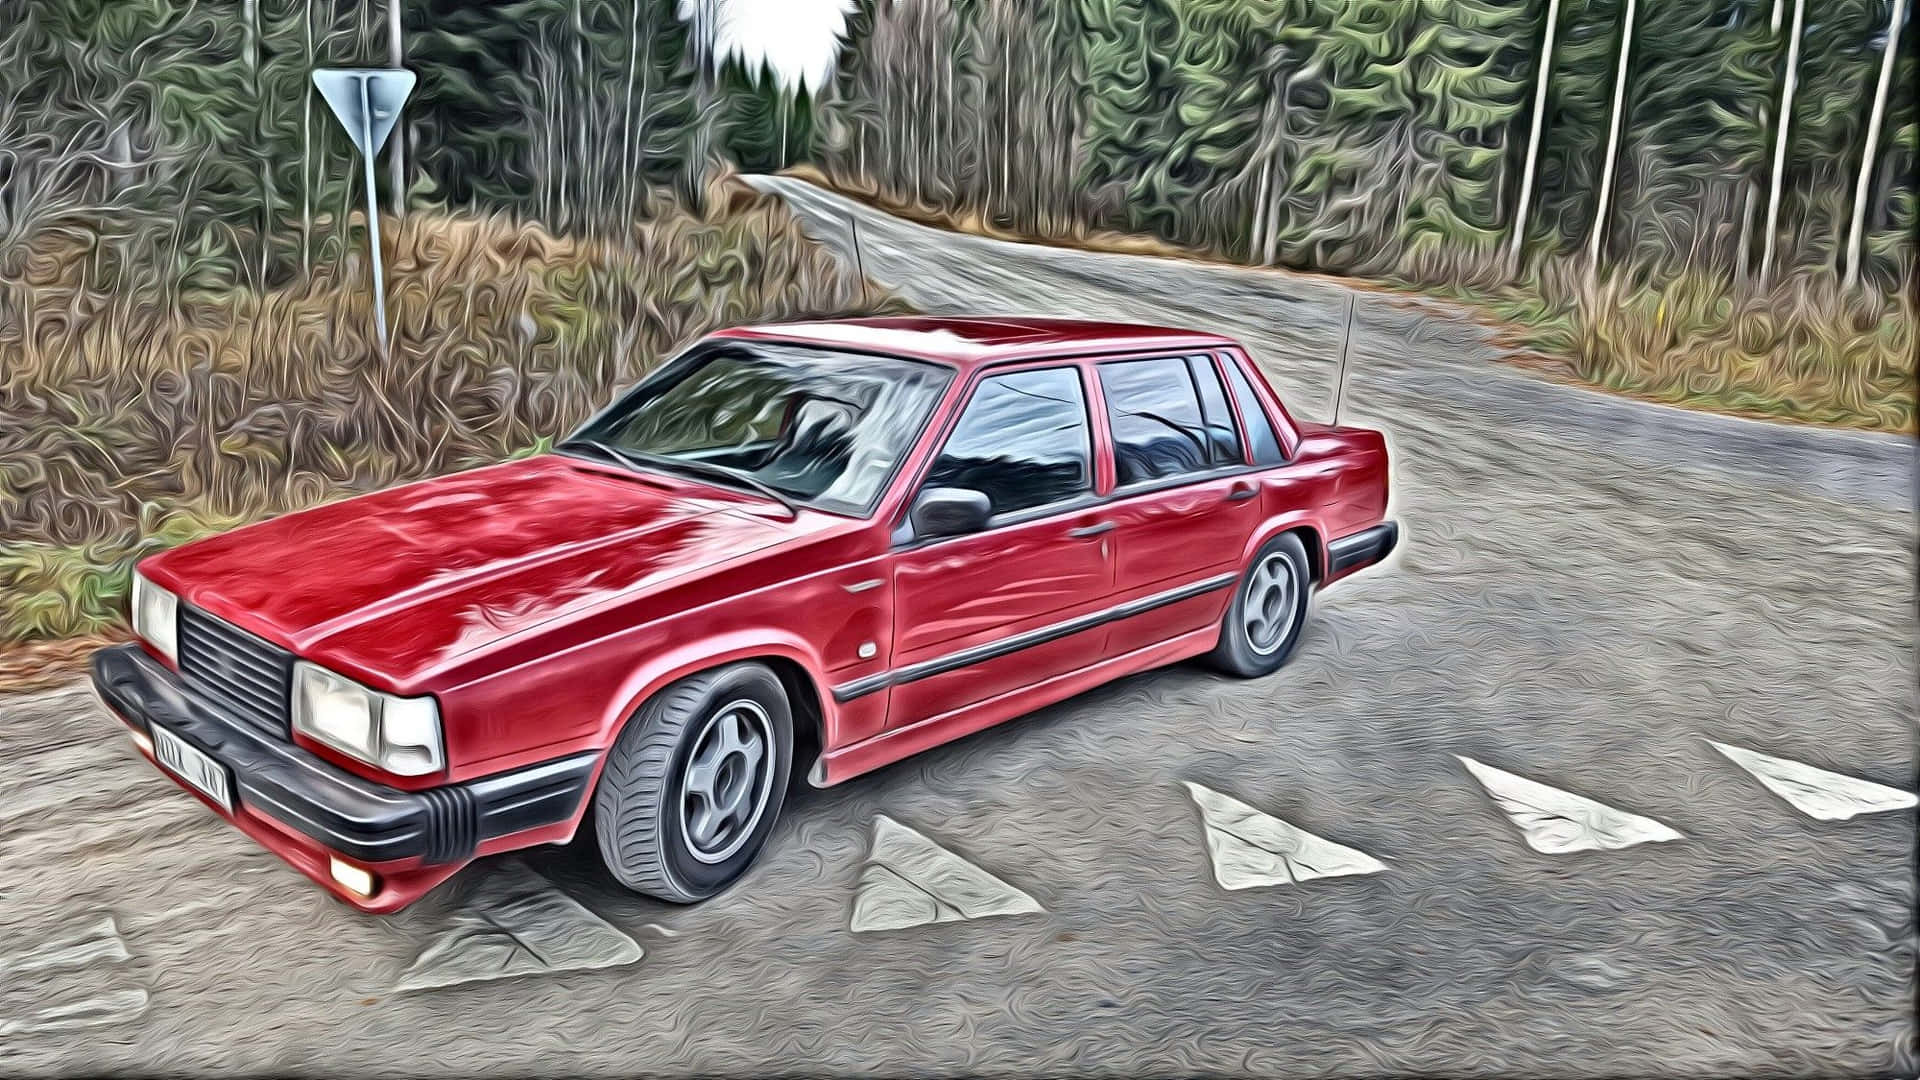 Vintage Volvo 740 On The Road Wallpaper